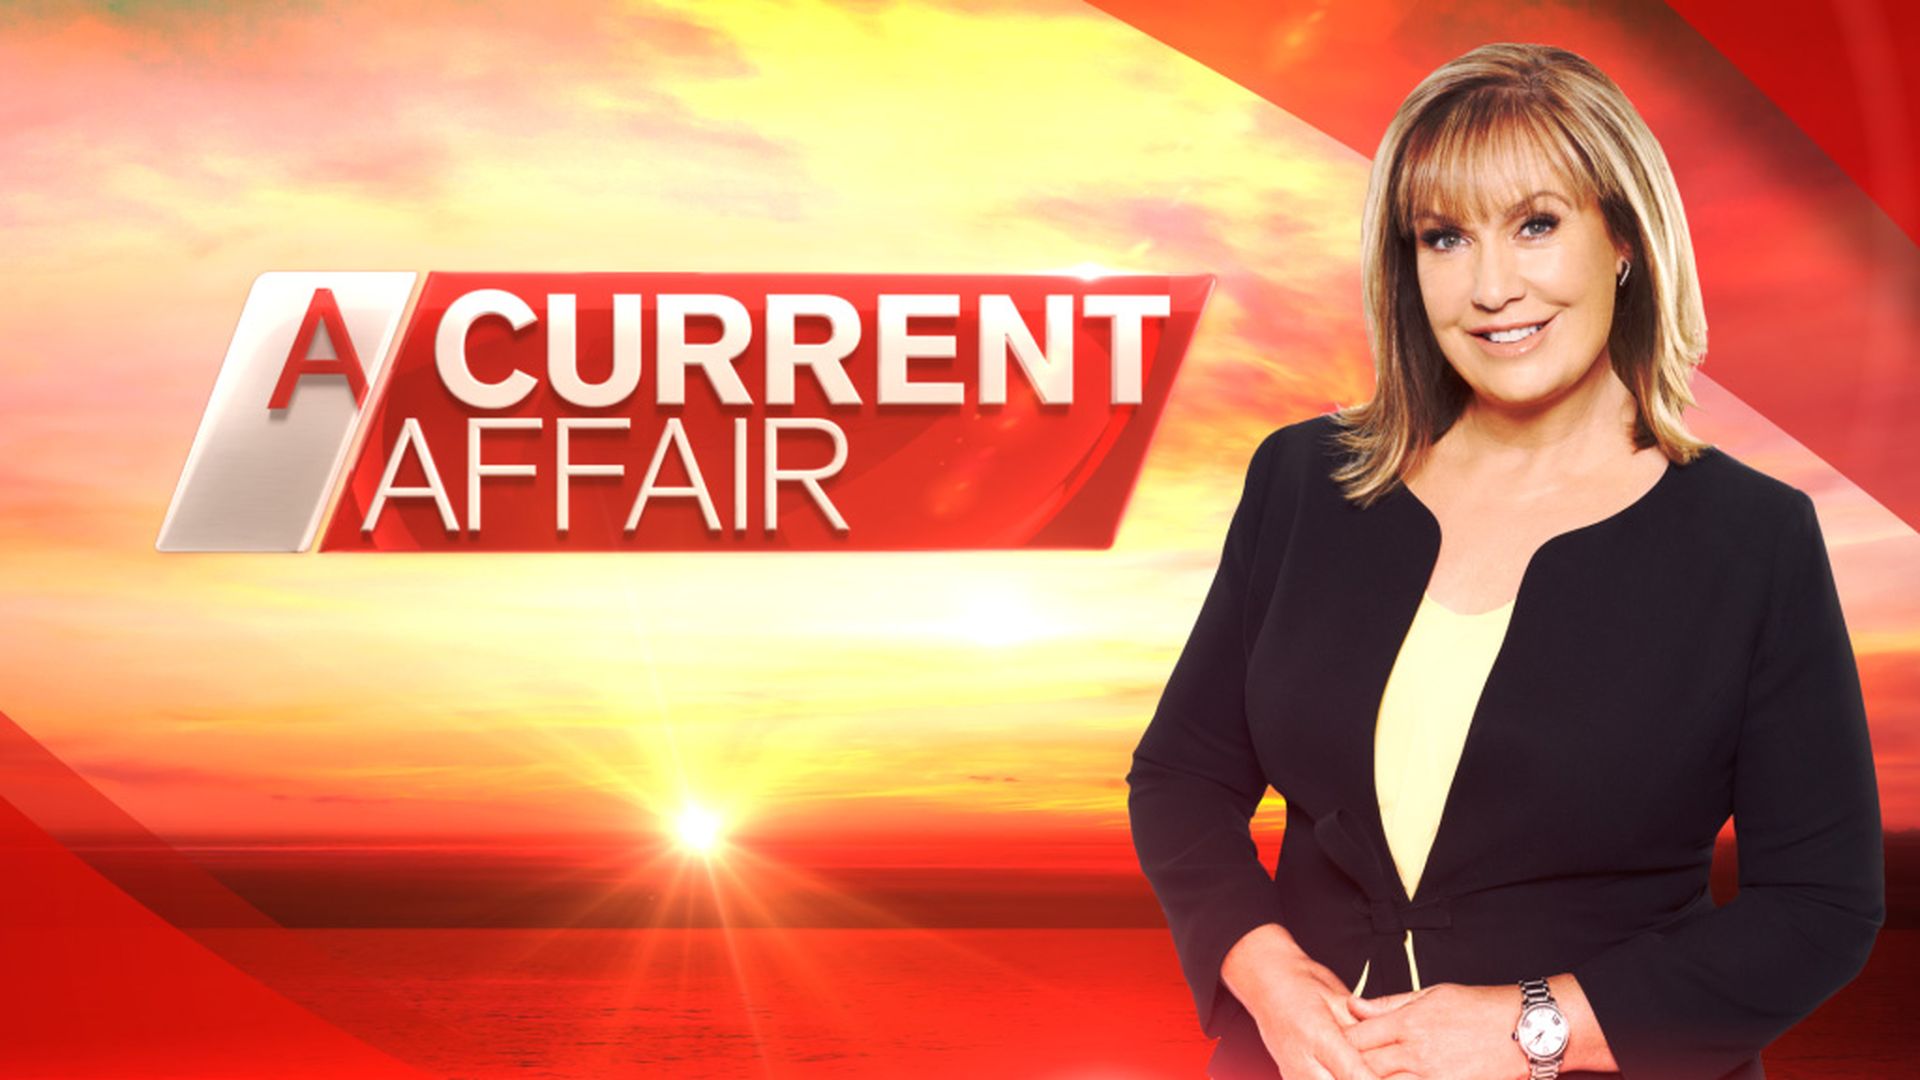   A CURRENT AFFAIR continues to dominate at 7pm  